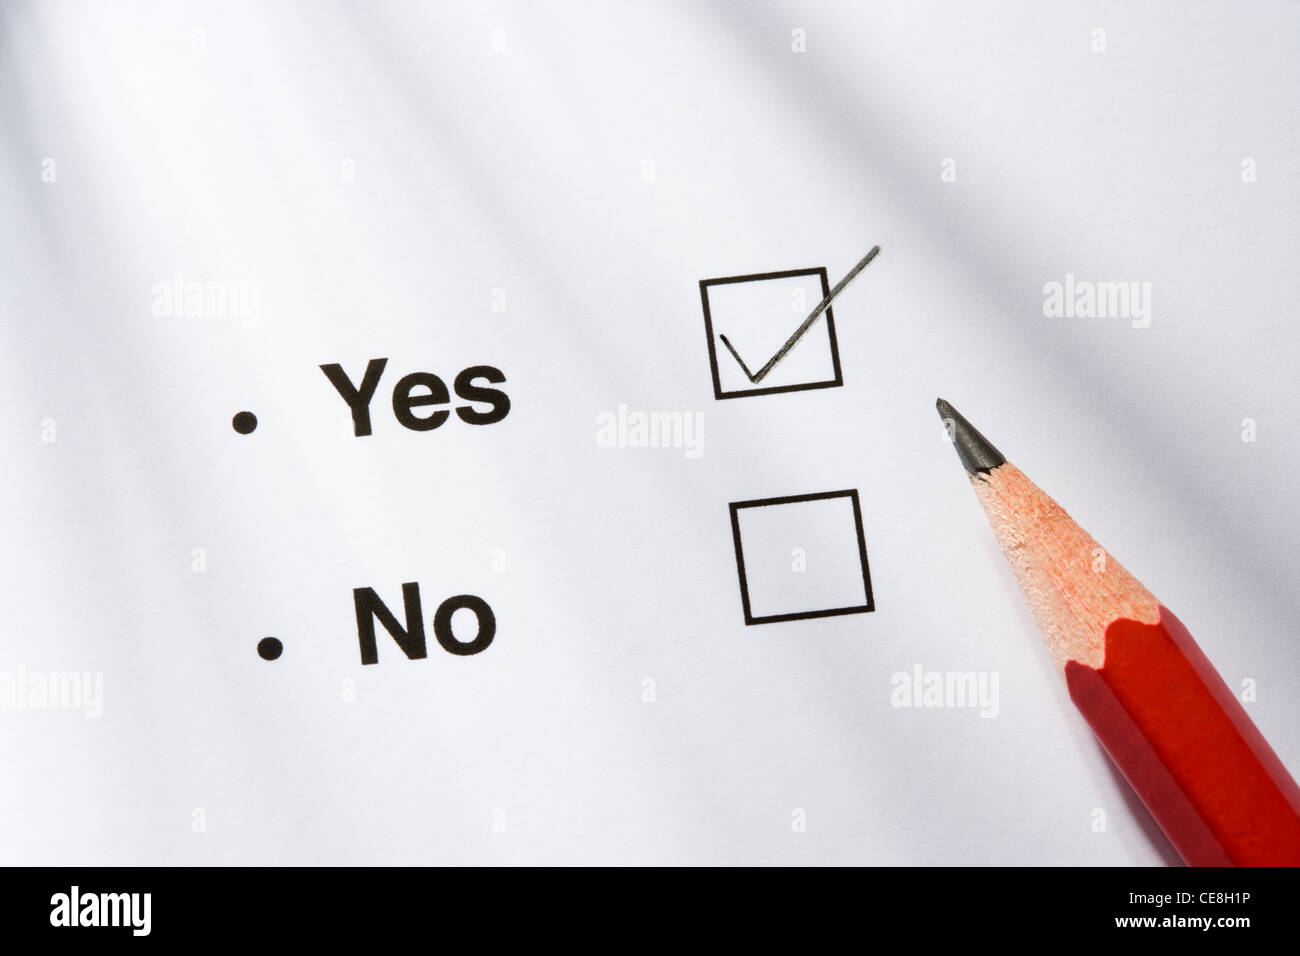 Yes/no option and pencil. Yes ticked. Stock Photo